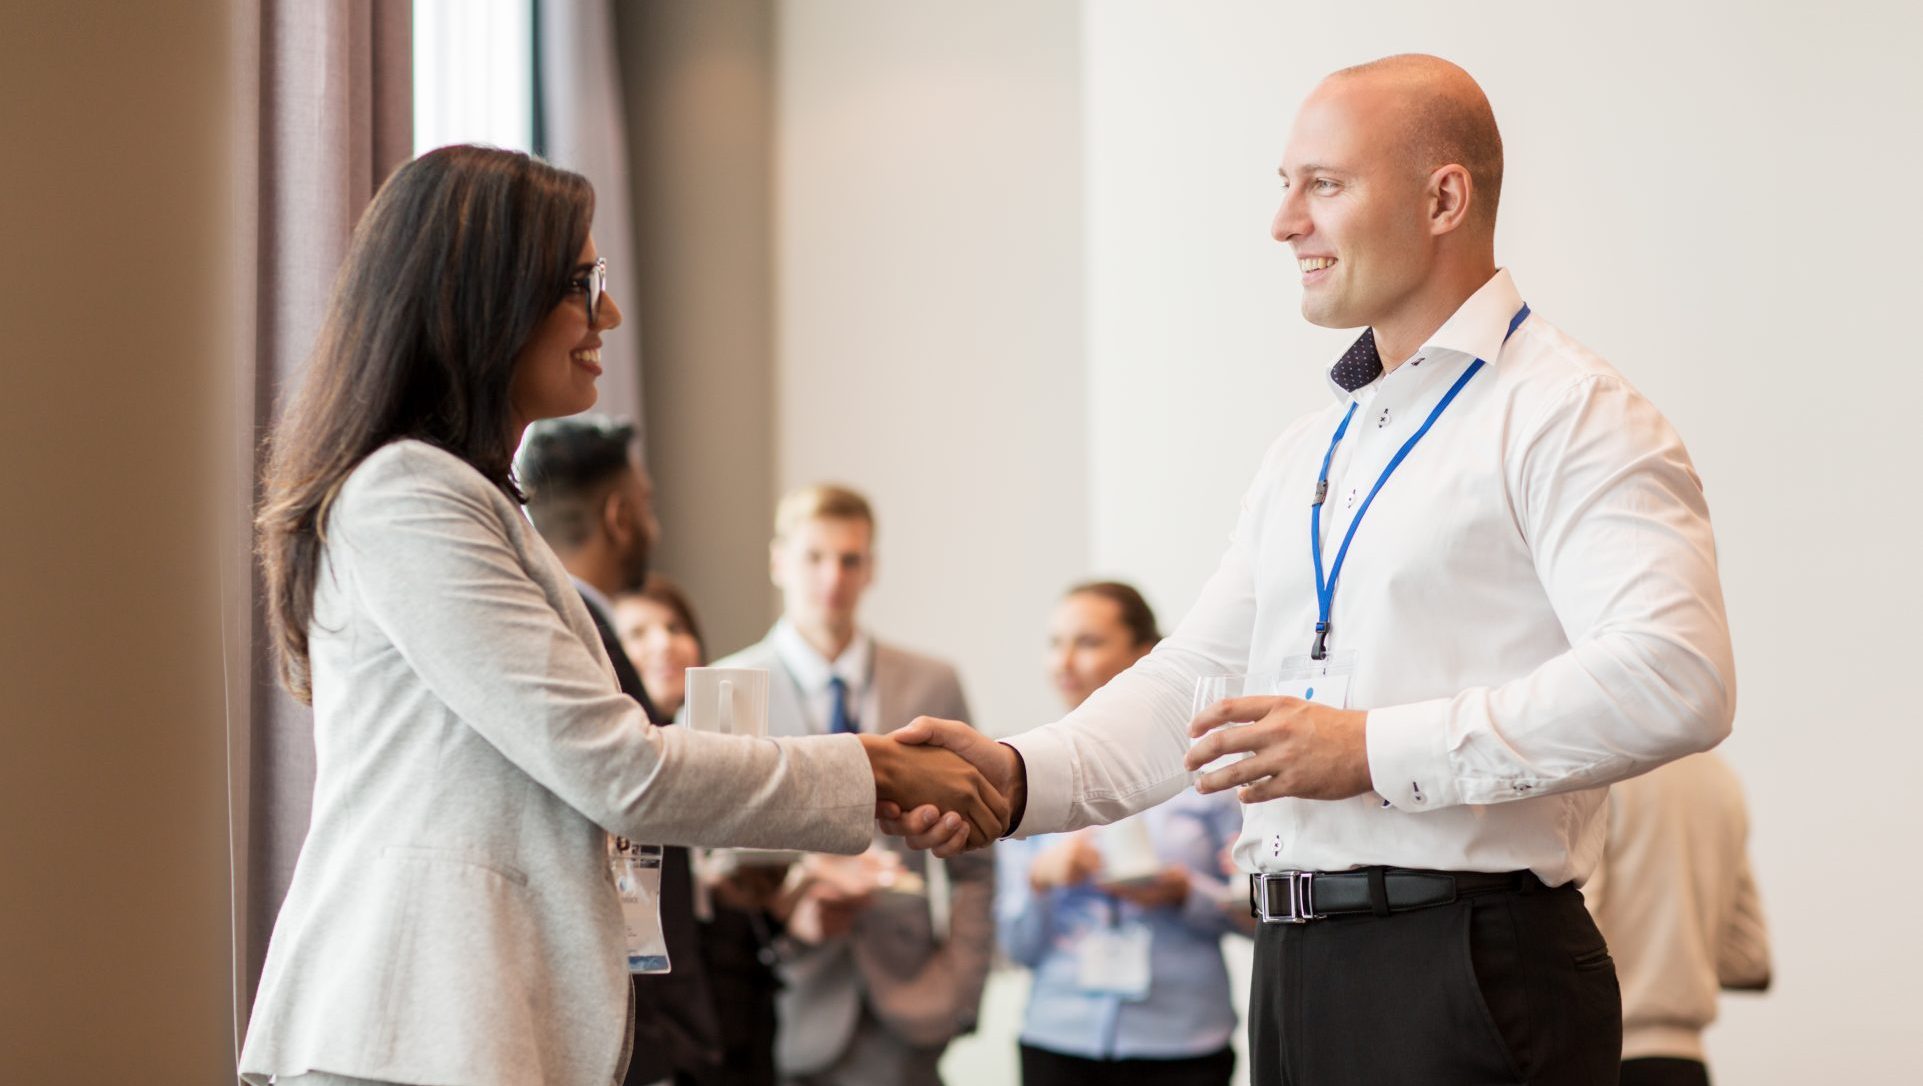 handshake of people at business conference